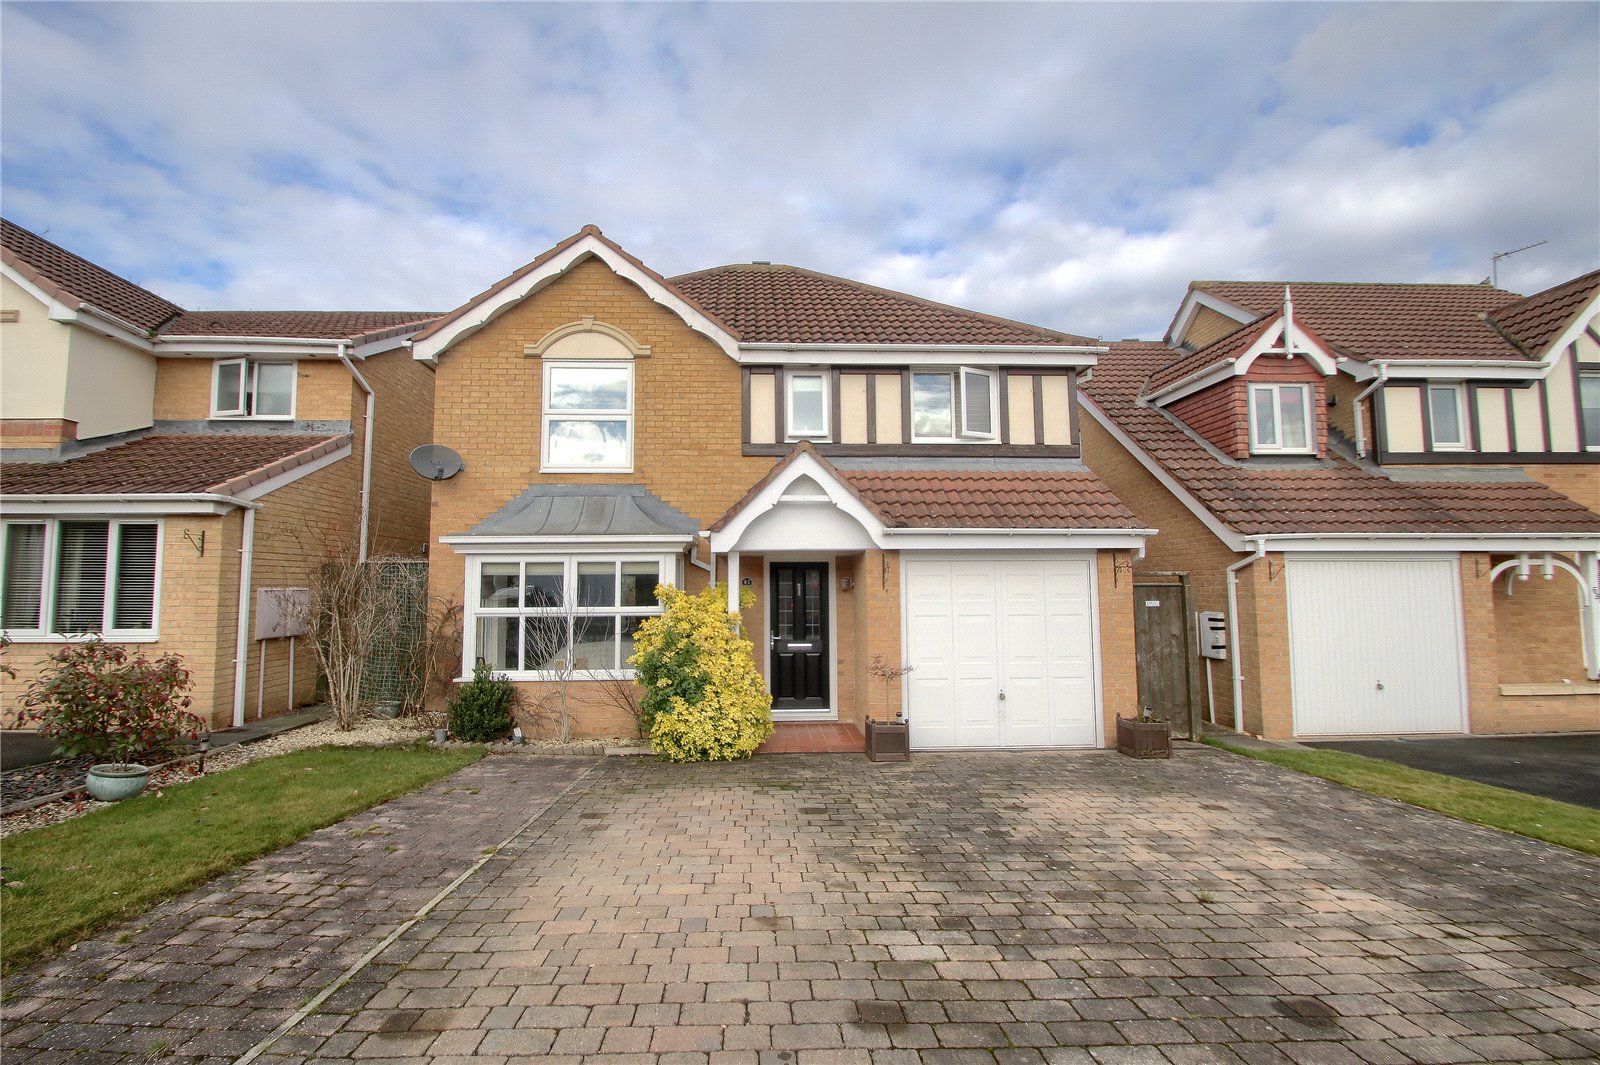 4 bed house for sale in Chaldron Way, Eaglescliffe - Property Image 1